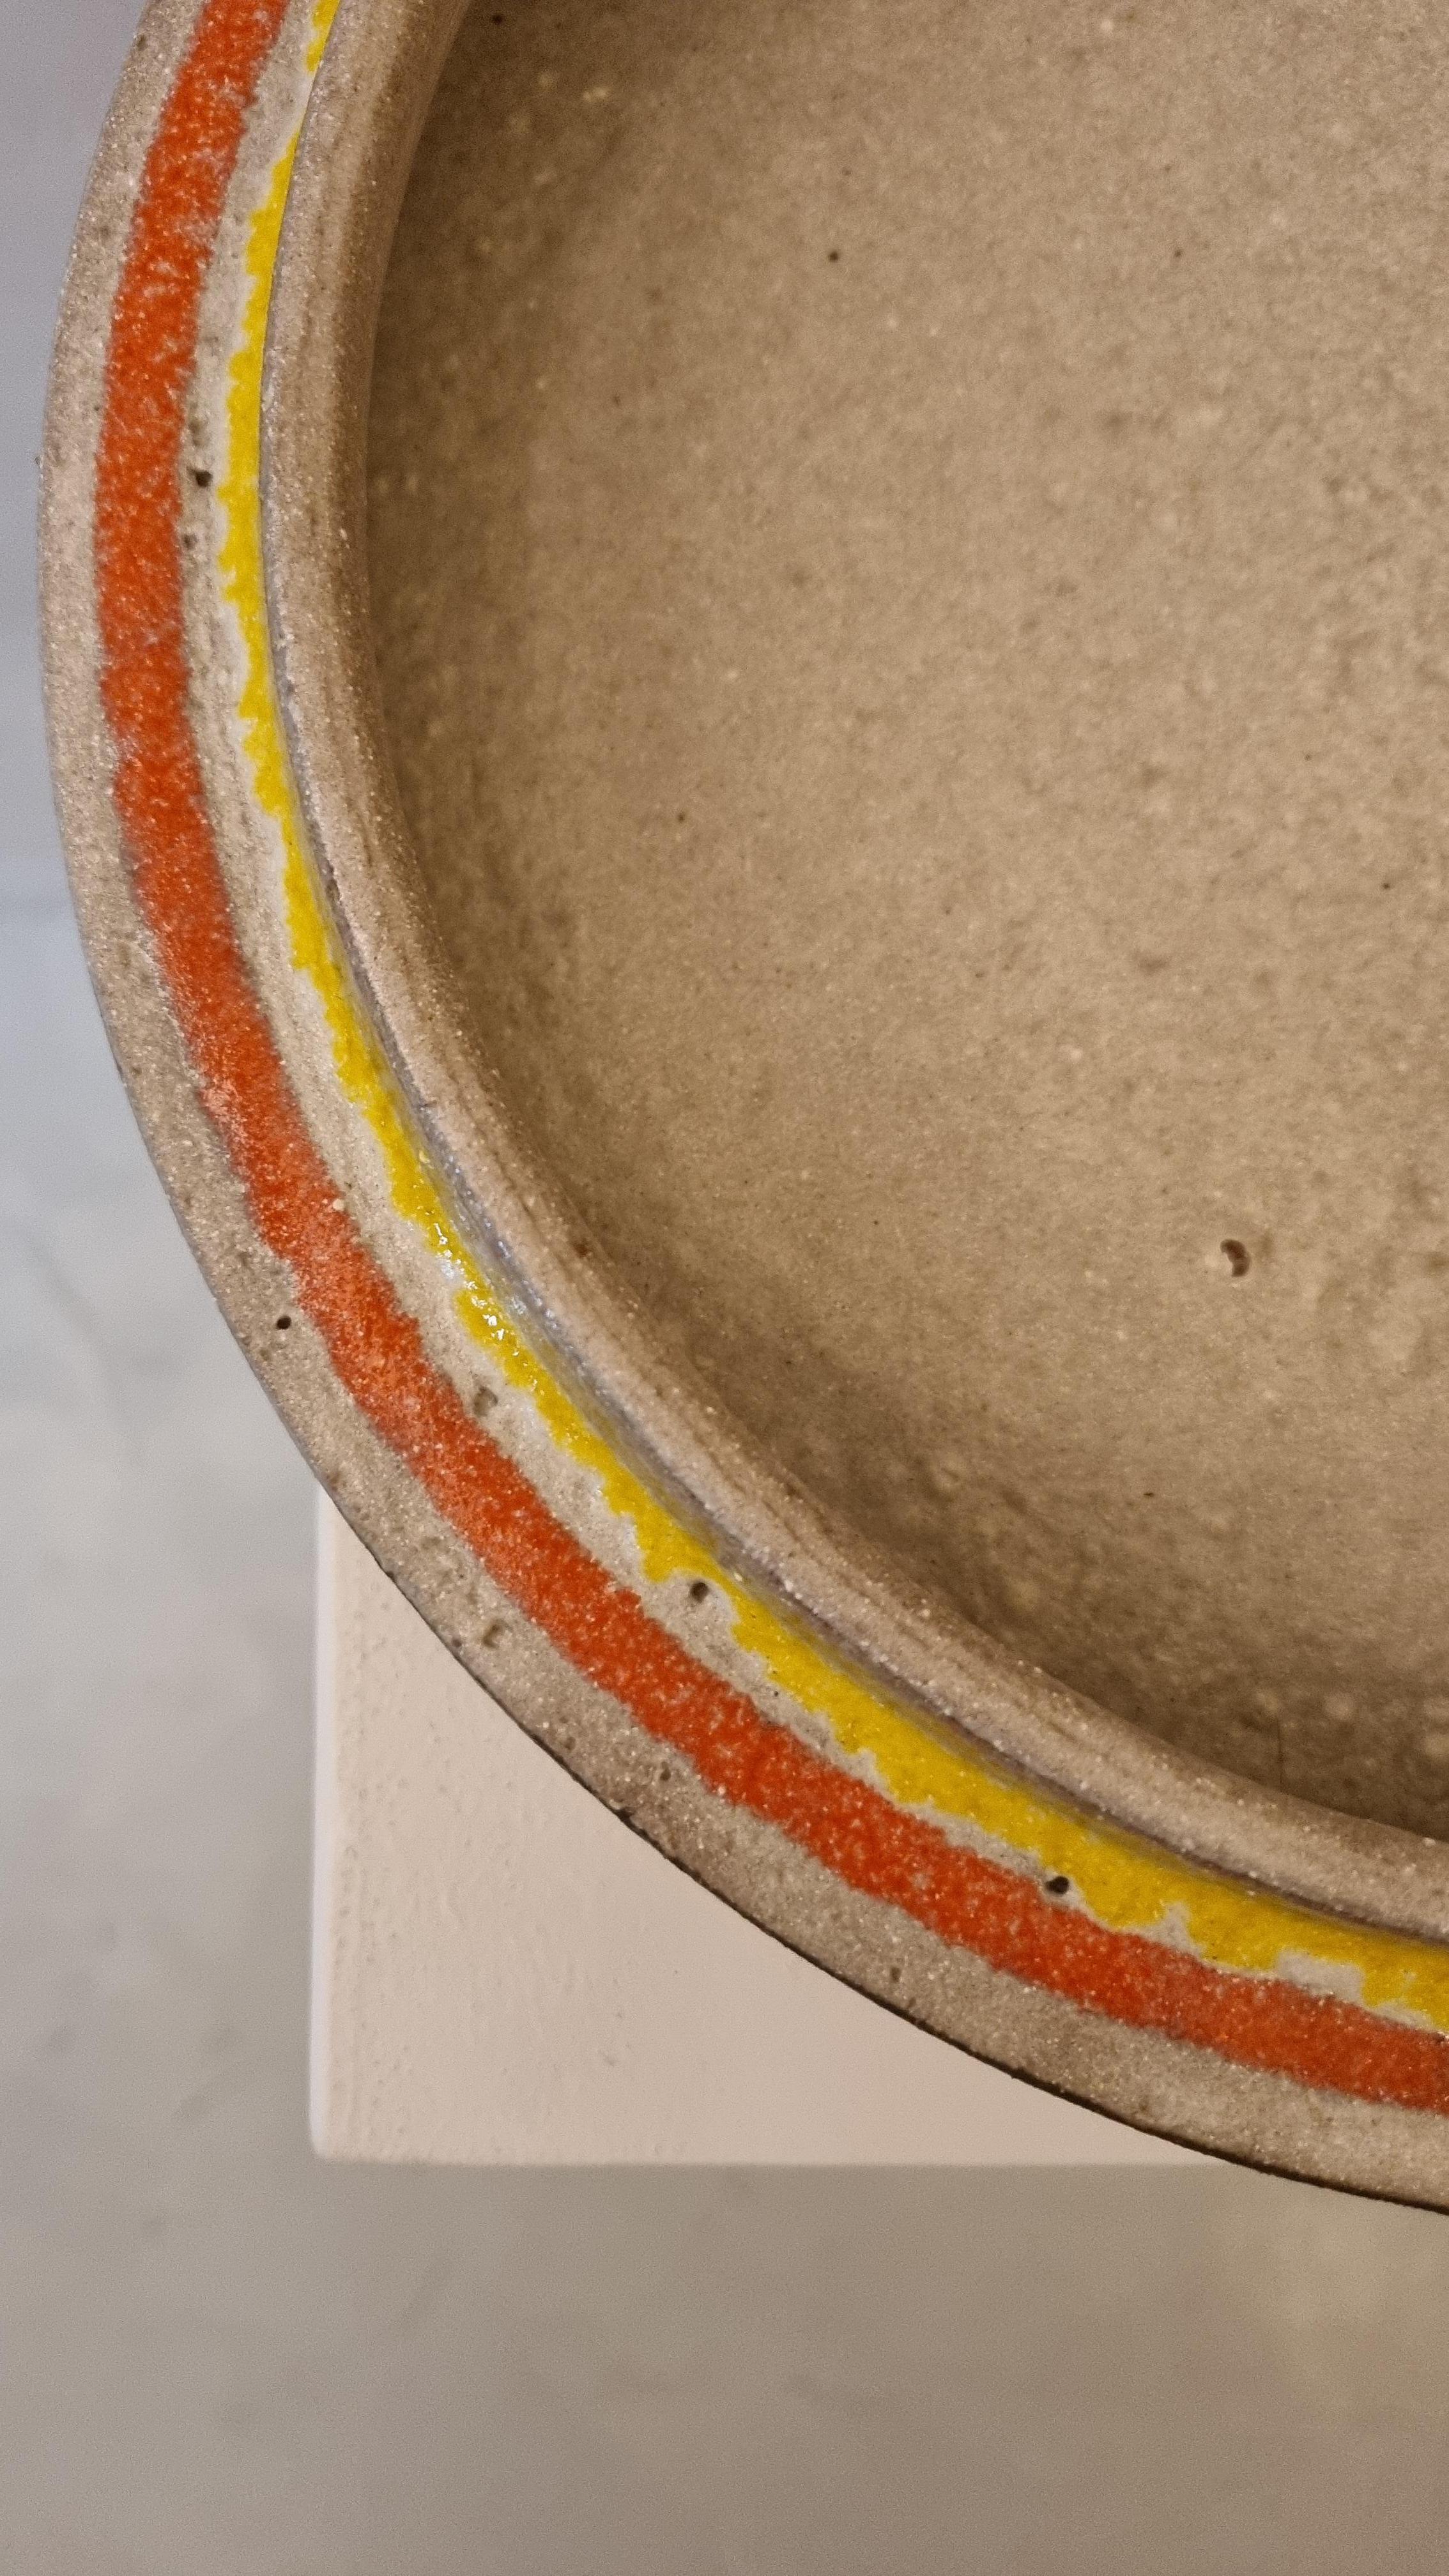 Ceramic ashtray by Aldo Londi for Ceramiche Bitossi Montelupo, 70s.
Glazed ceramic, matte raw clay.
Each work created by Bitossi follows a very complex working process, both in the formal and decorative part.
The realization of a ceramic work can be